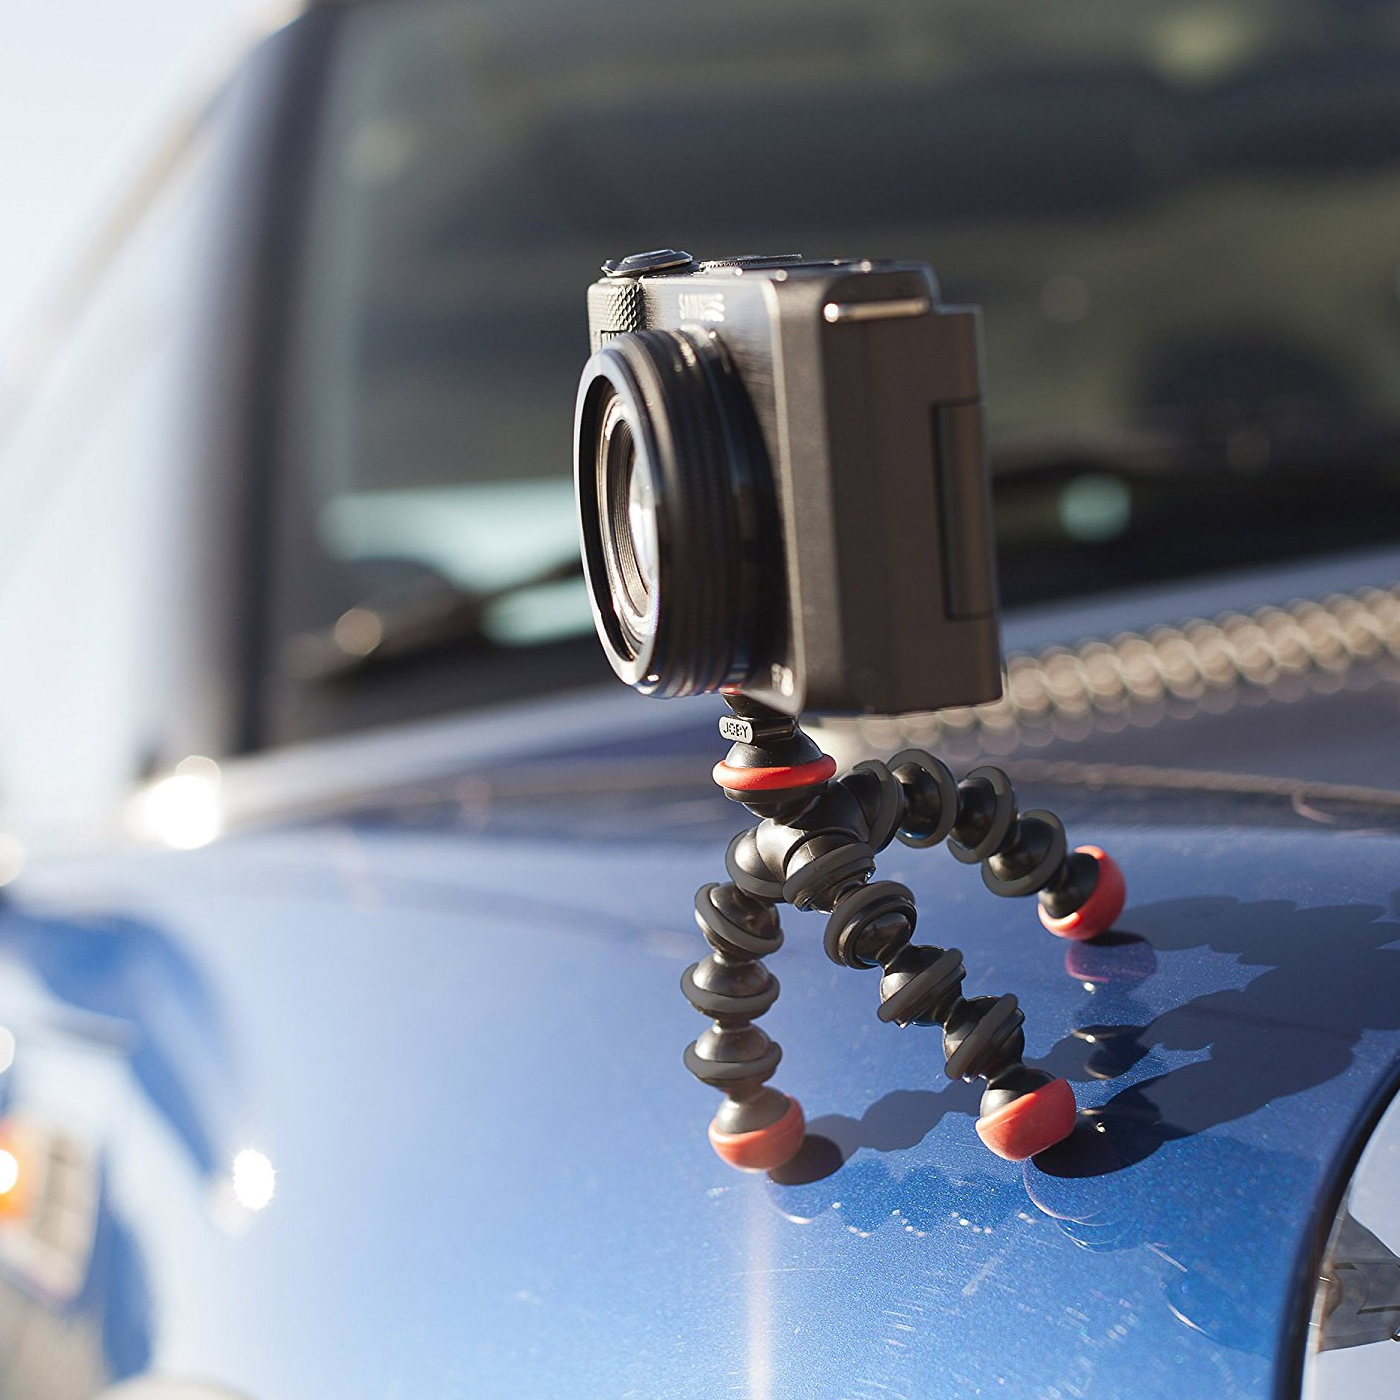 Joby GorillaPod Magnetic Mini Flexible Tripod for Point & Shoot and Small Cameras - image 4 of 5